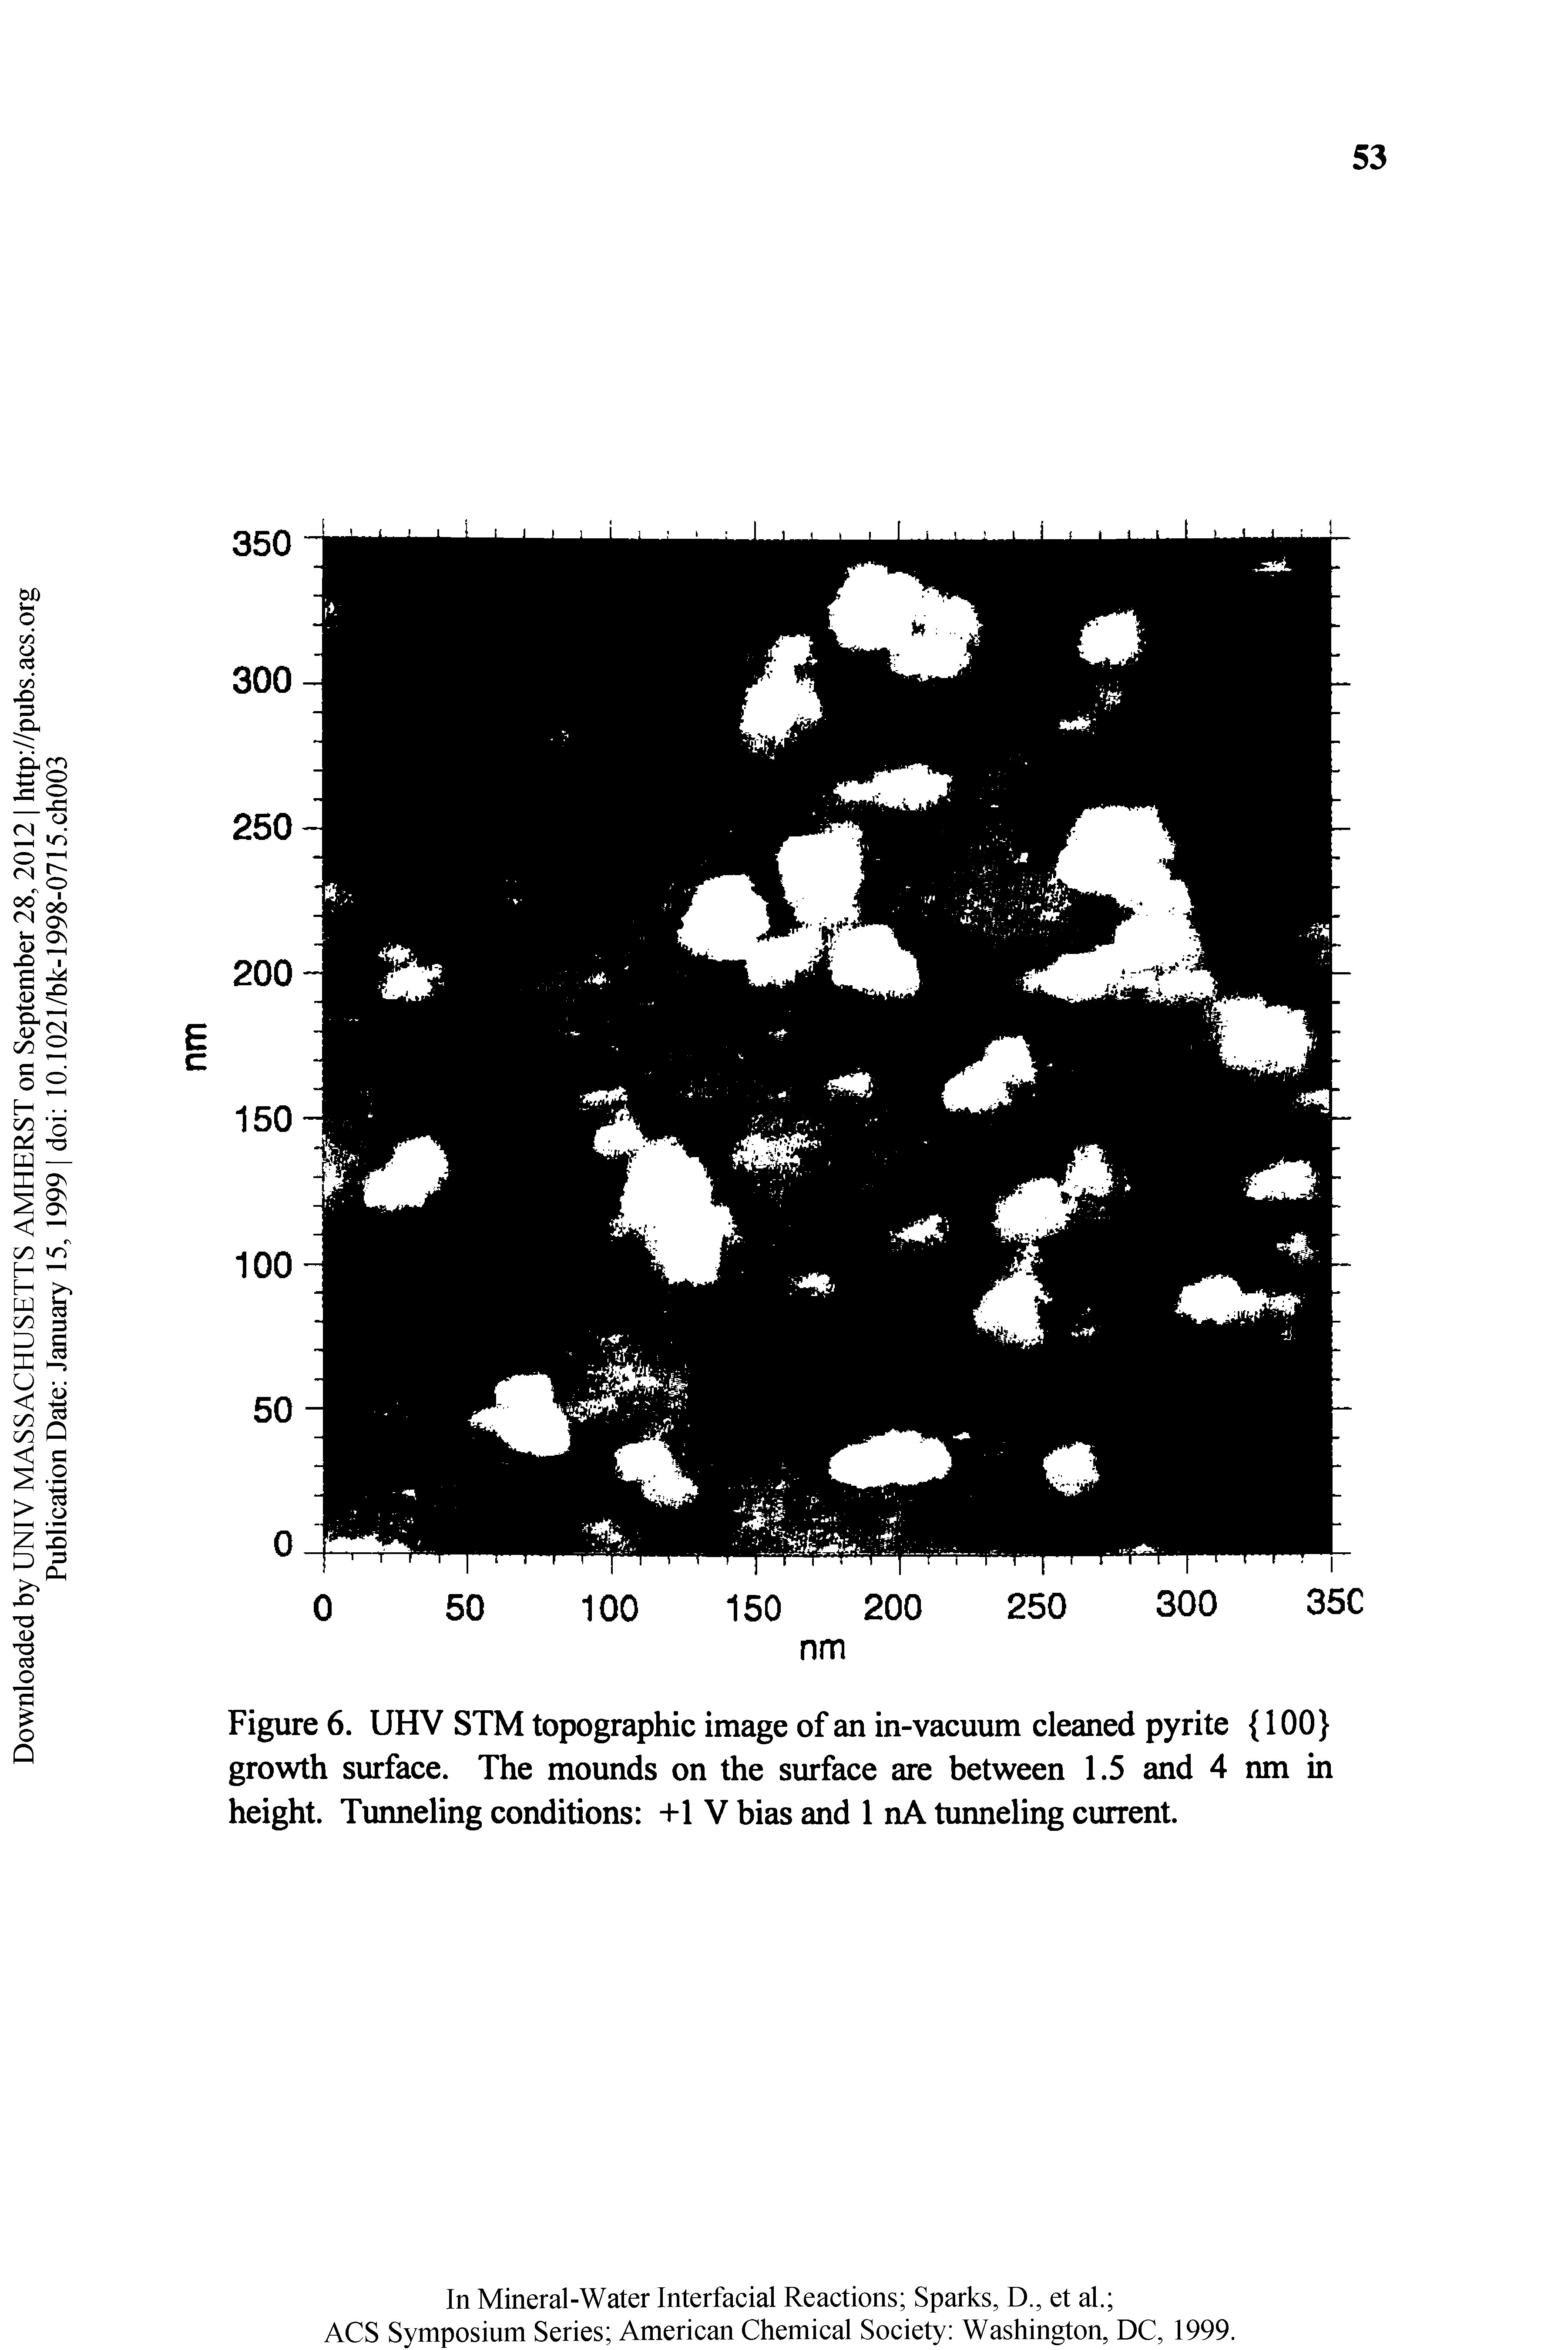 Figure 6. UHV STM topographic image of an in-vacuum cleaned pyrite 100 growth surface. The mounds on the surface are between 1.5 and 4 run in height. Tuimeling conditions +1 V bias and 1 nA tuimeling current.